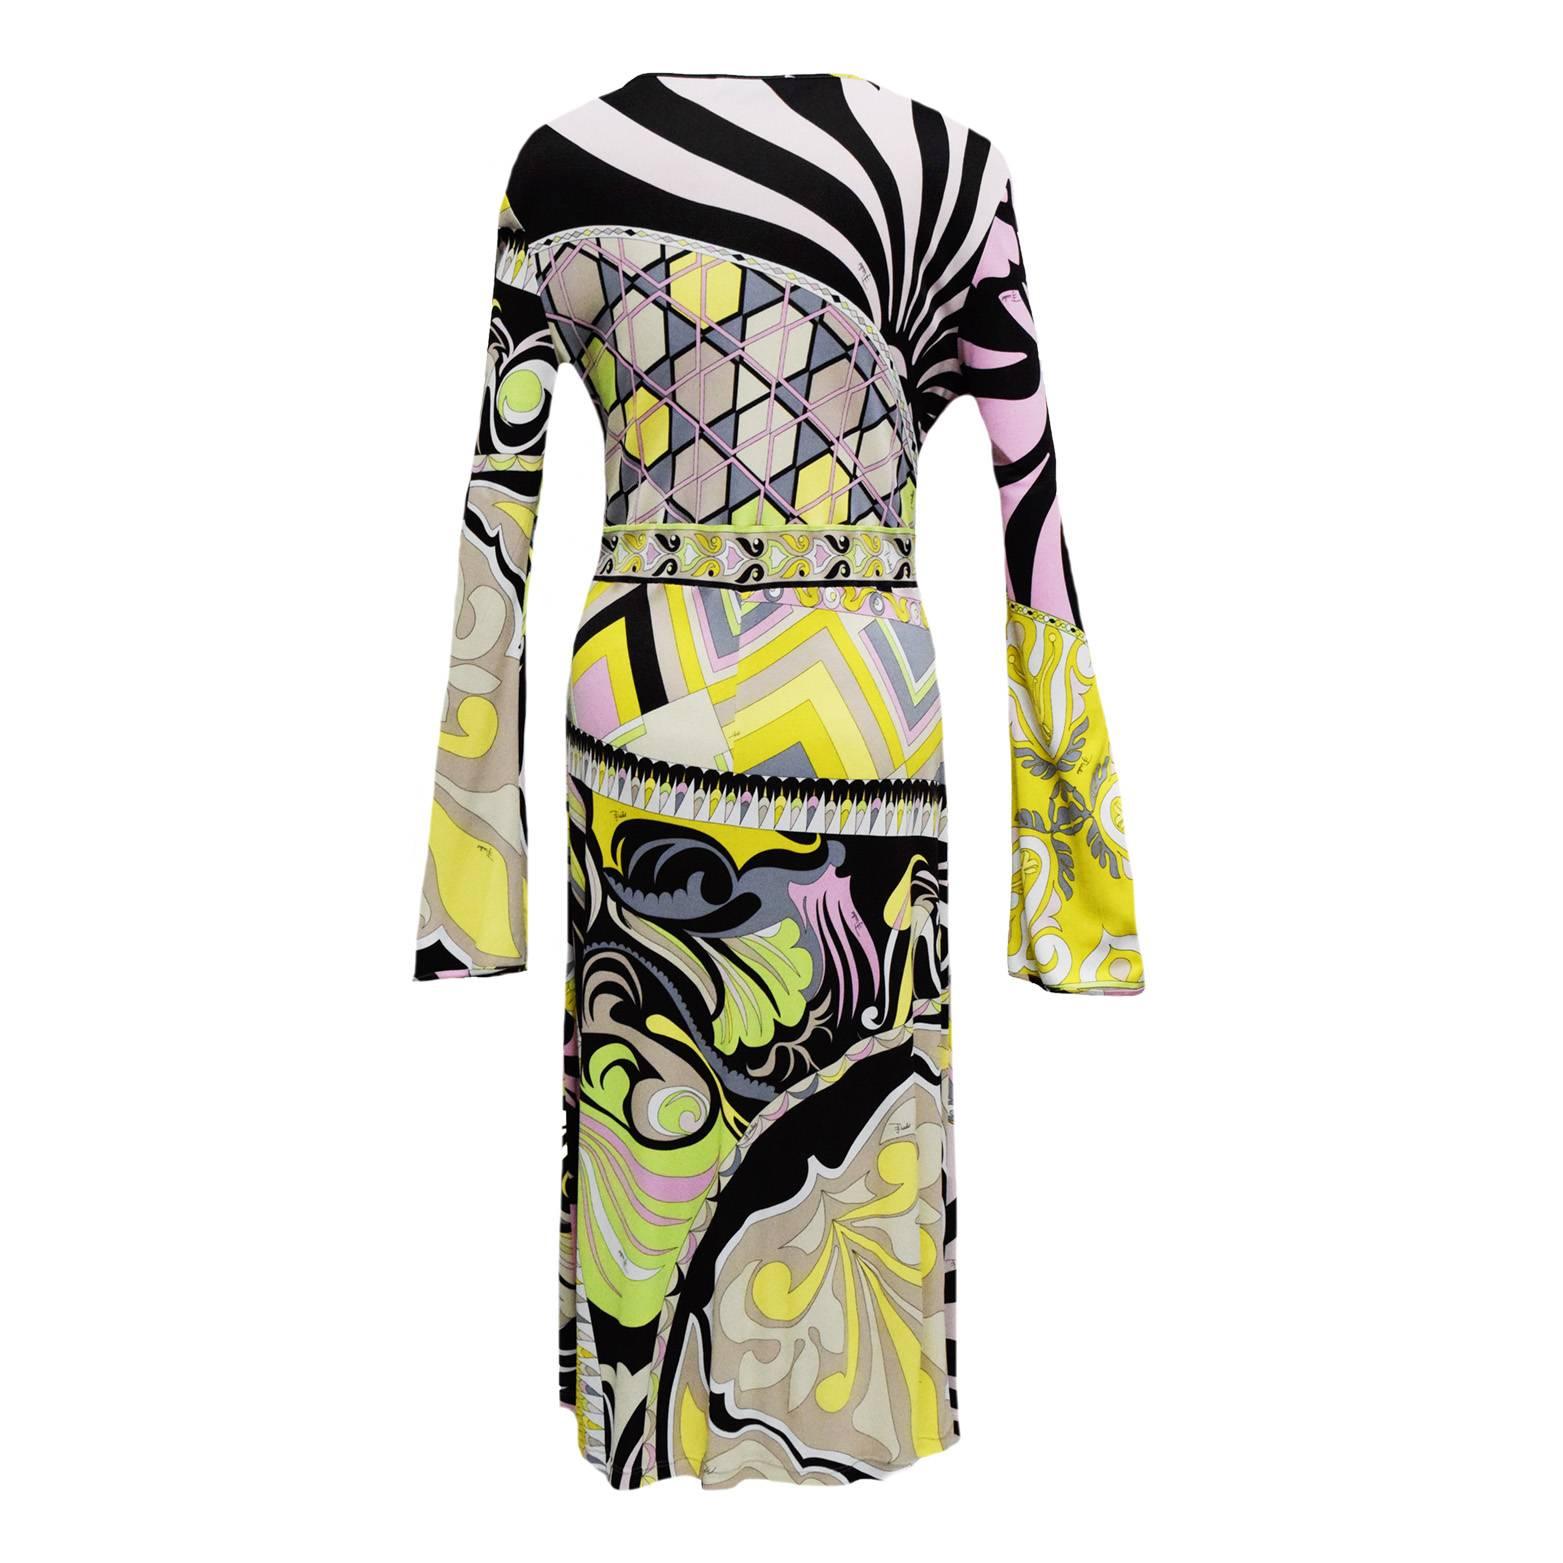 This fabulous dress is great for almost any occasion. Classically printed in Pucci's signature print and coloration. This dress is knee length and 100% Rayon. Slight trumpet sleeve and deep v-neckline. 